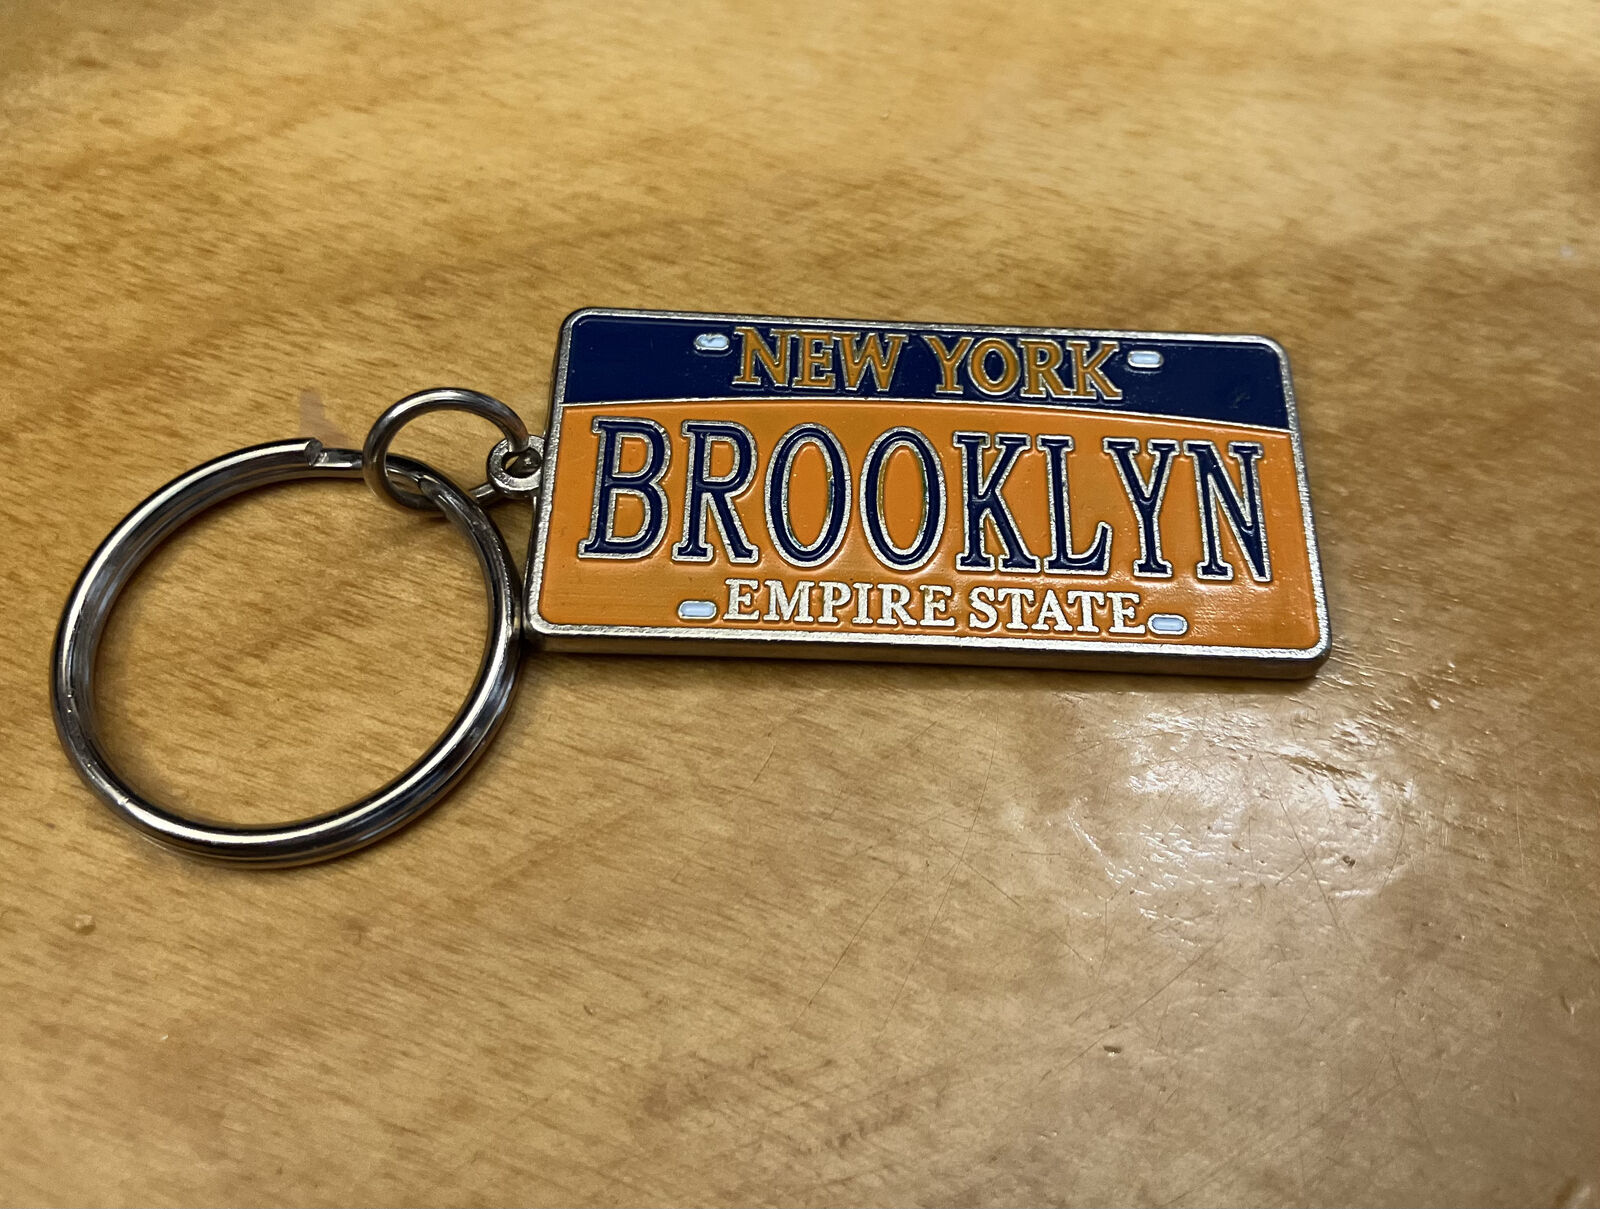 Brooklyn New York Empire State  License Plate Keychain